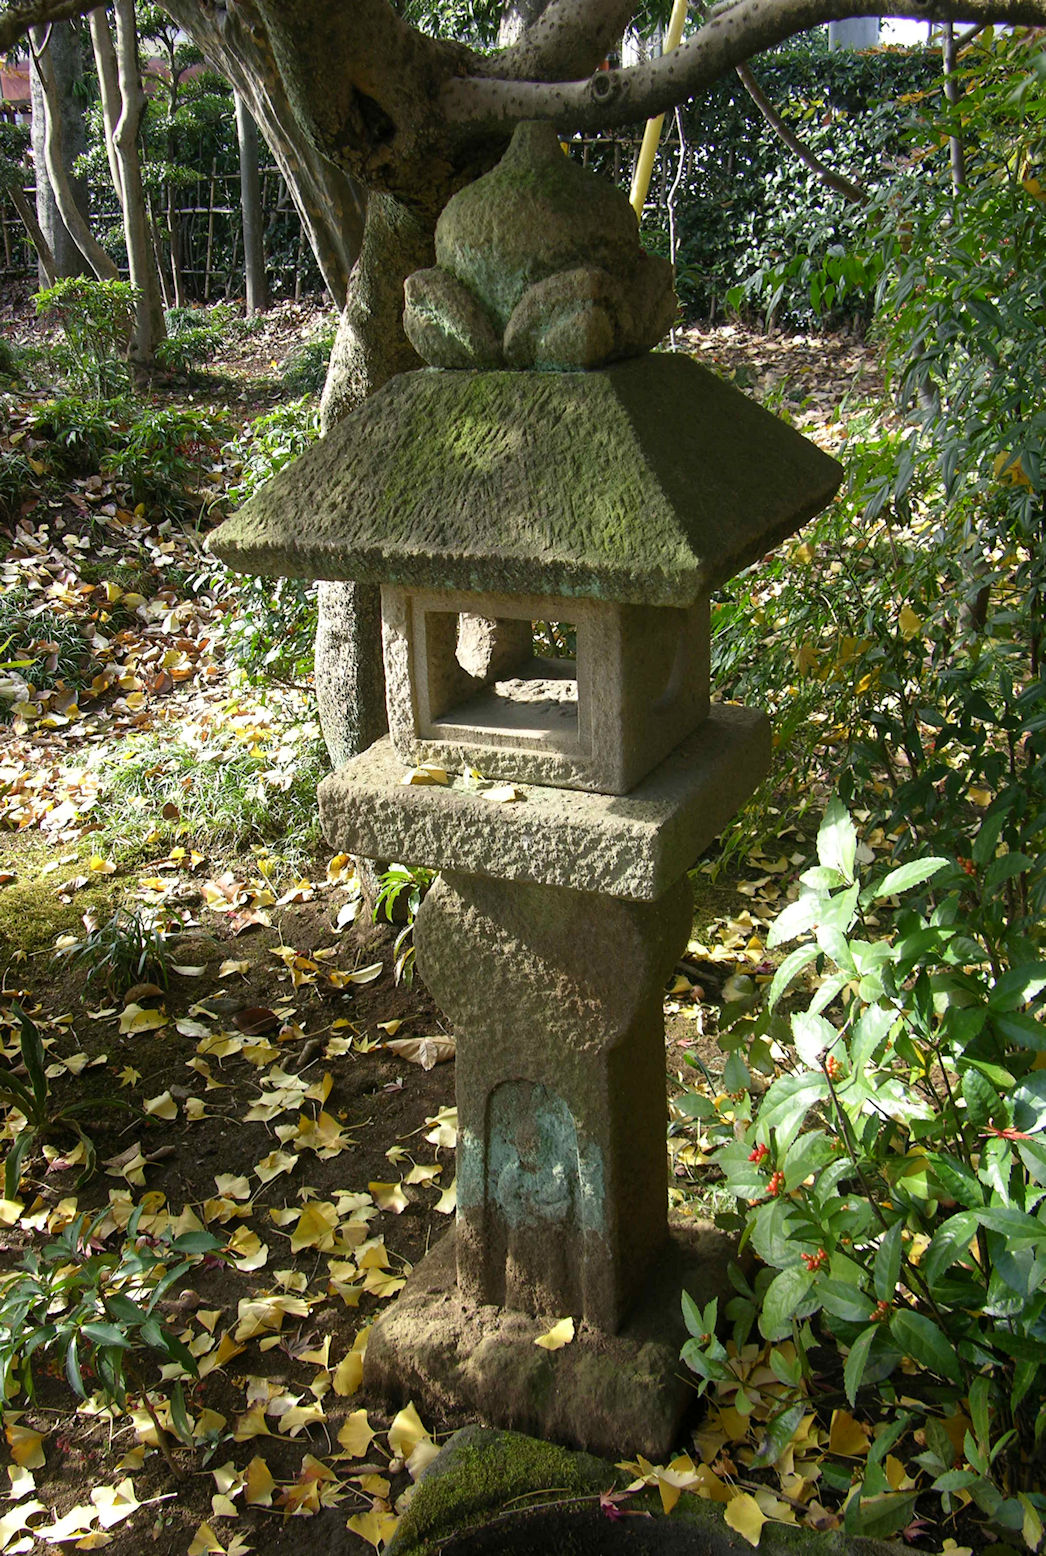 Kirishitan Garden Lantern in a private mansion in Higashiyamato, Tokyo. (03/12/2006). The figure engraved on the stem looks like a woman holding a baby. It was brought from Matsue, Shimane Prefecture.